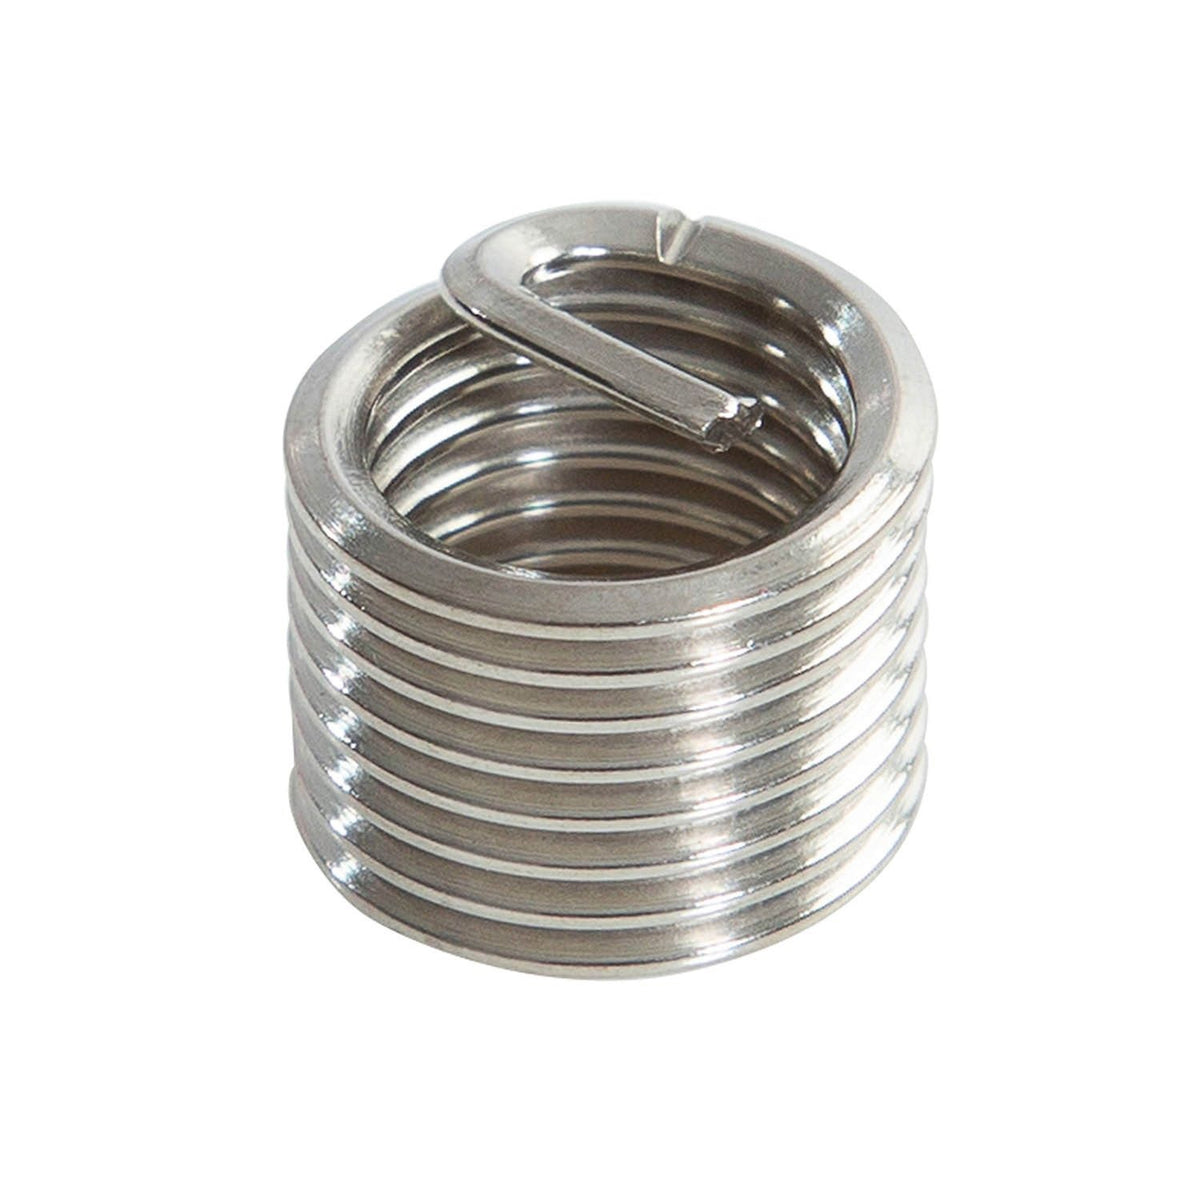 OEMTOOLS 25633 Helical Thread Insert, Stainless Steel